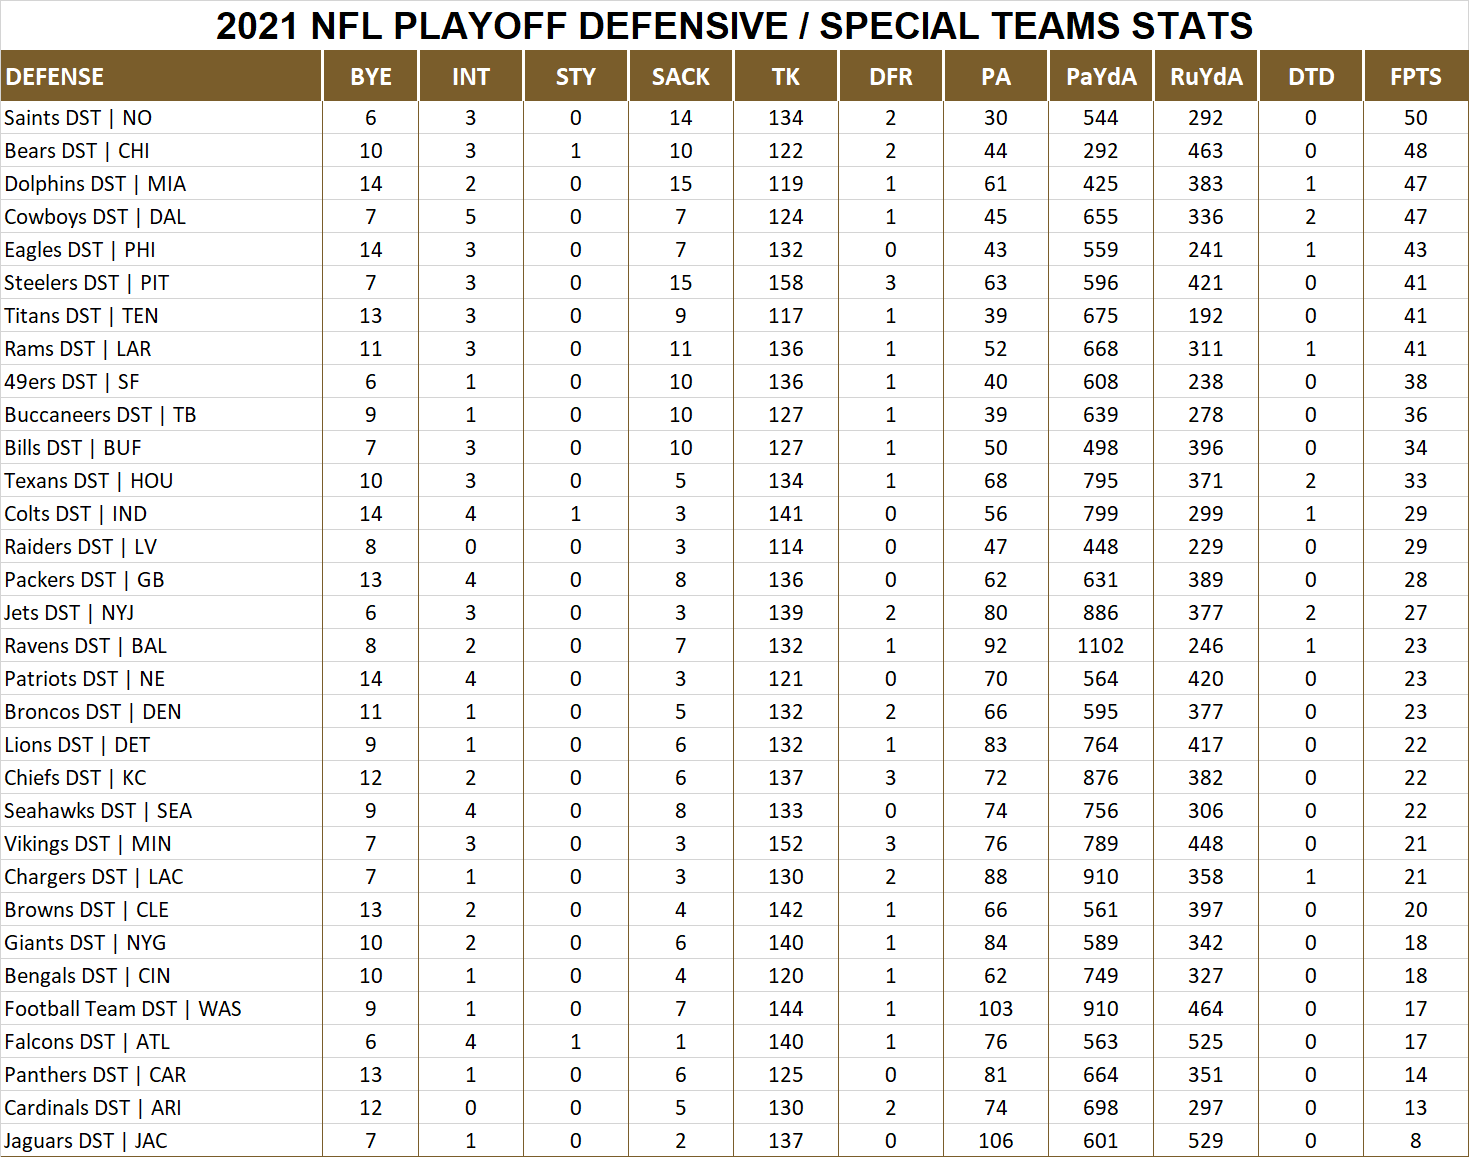 2021 National Football League Pool Playoff Player Defensive Stats